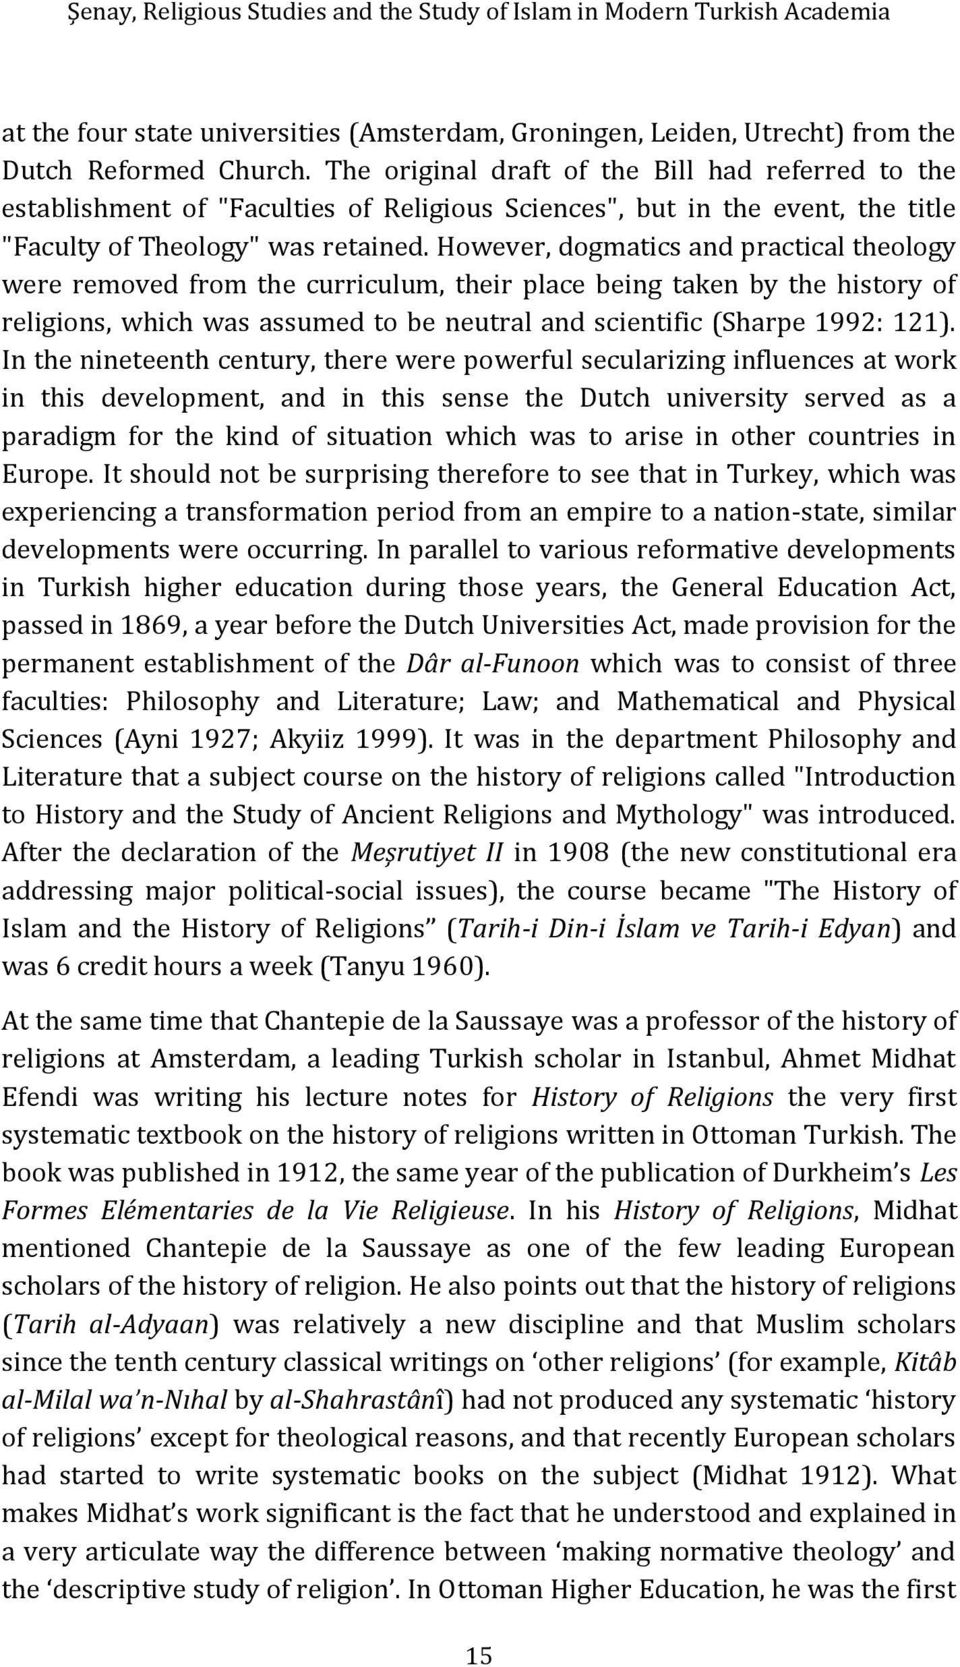 However, dogmatics and practical theology were removed from the curriculum, their place being taken by the history of religions, which was assumed to be neutral and scientific (Sharpe 1992: 121).